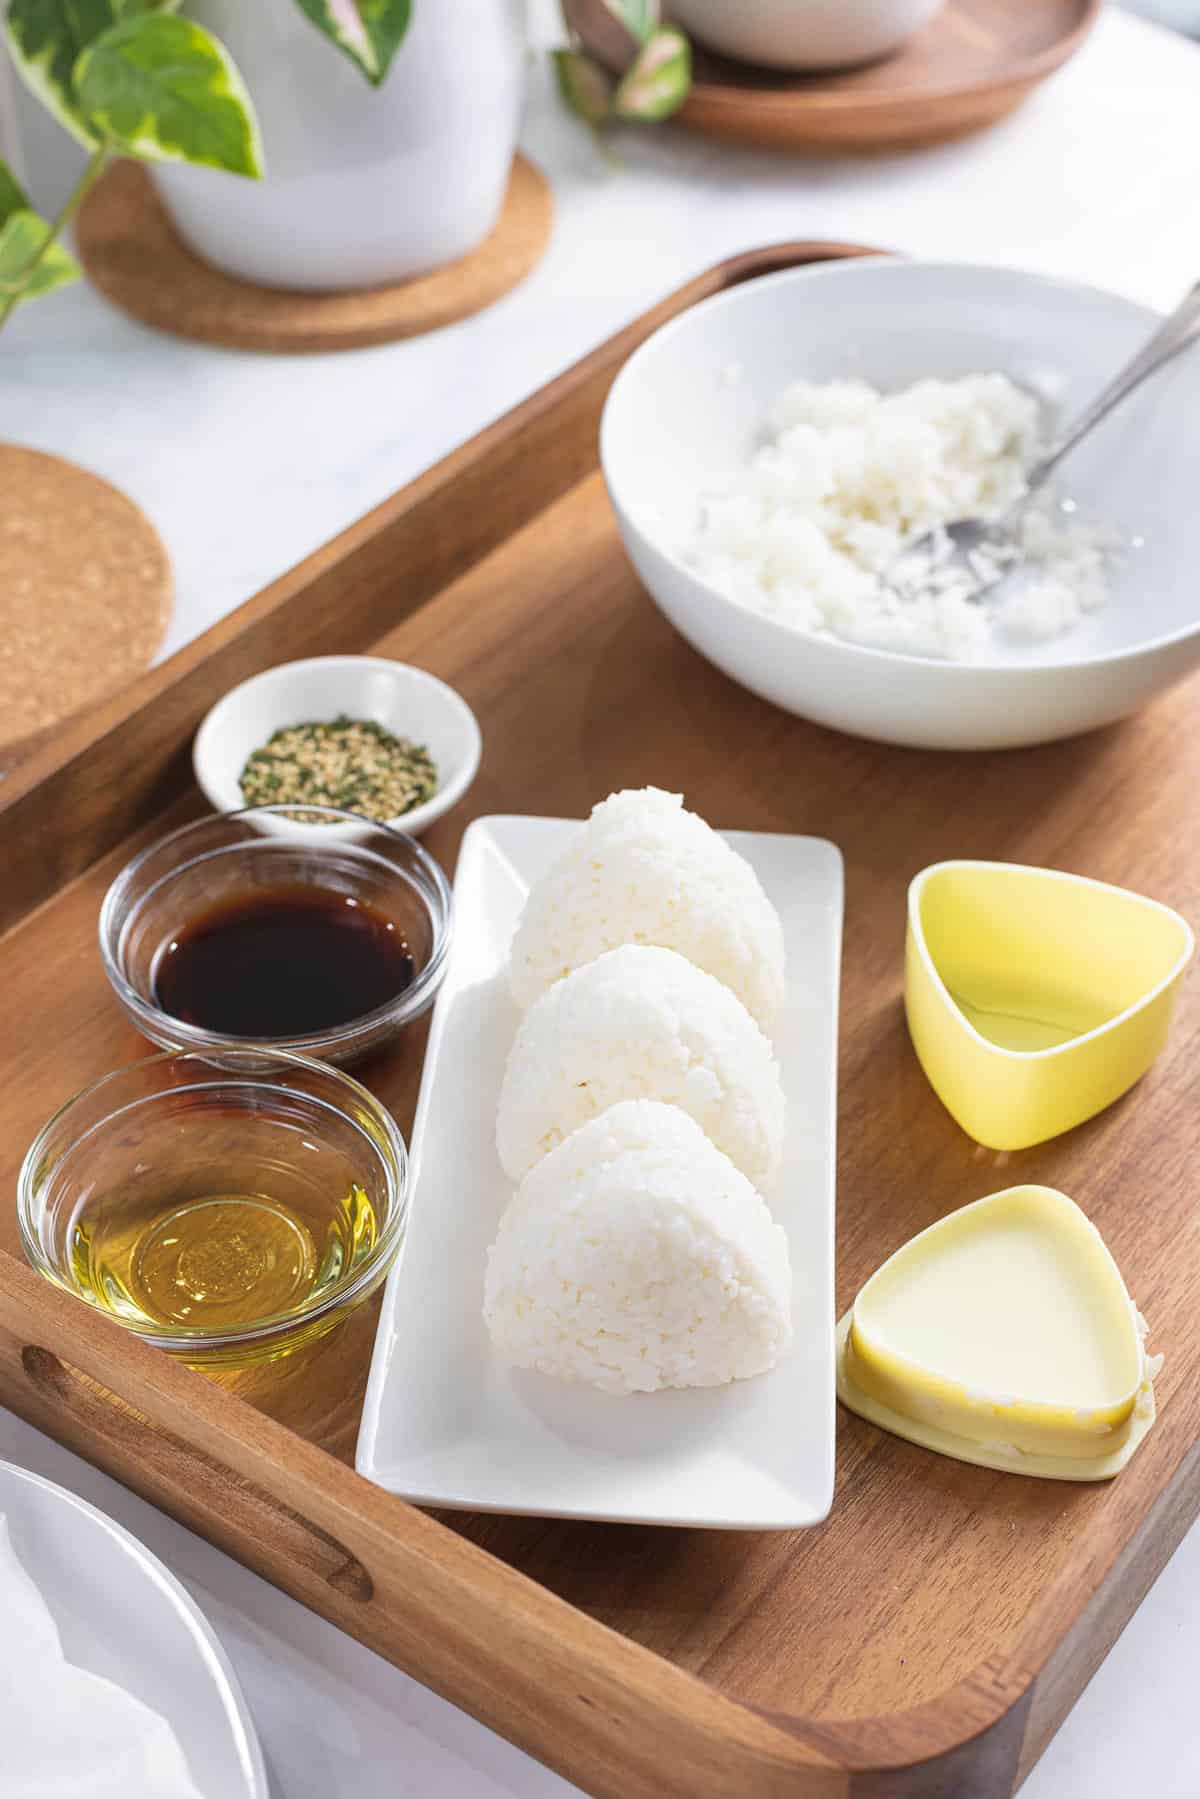 Rice balls formed into triangular shapes next to oil and soy sauce.